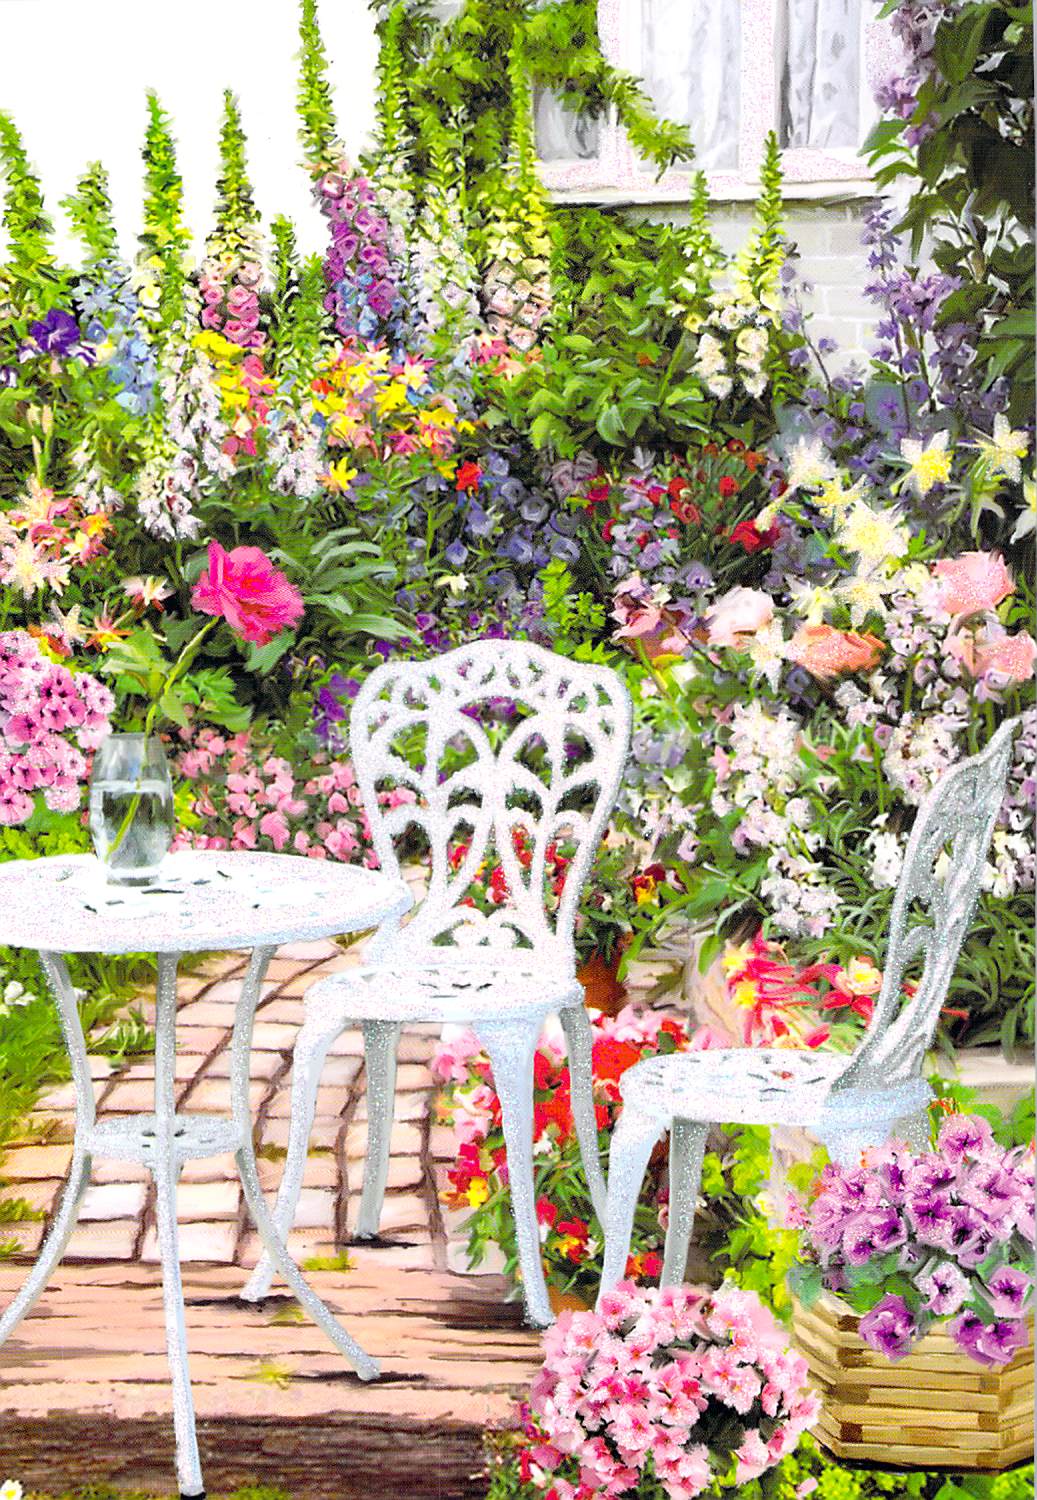 Patio image with flowers all around